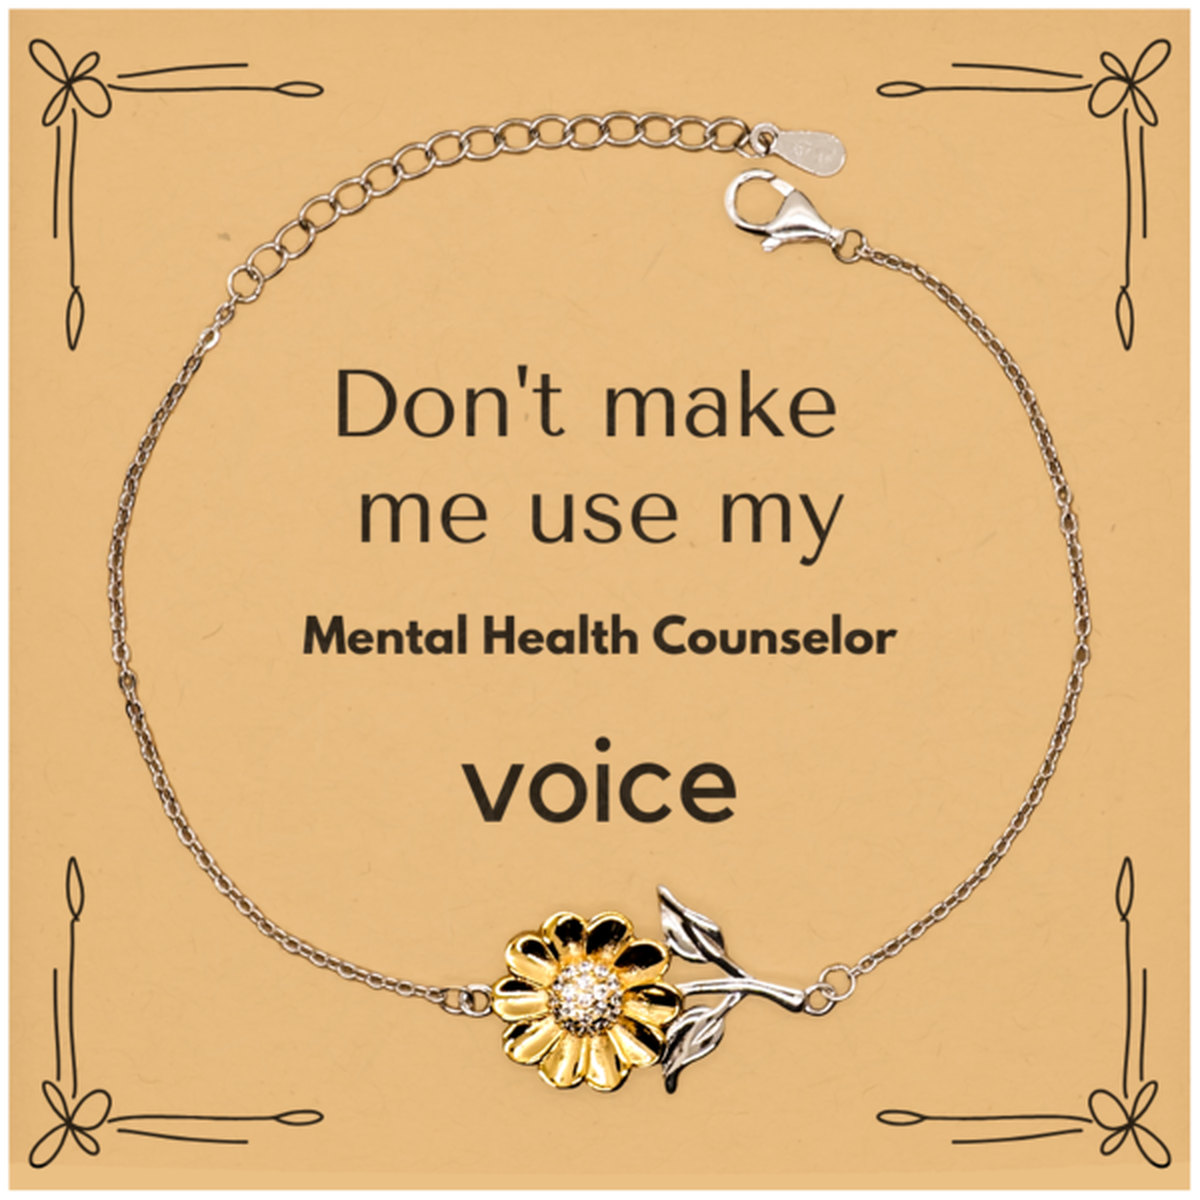 Don't make me use my Mental Health Counselor voice, Sarcasm Mental Health Counselor Card Gifts, Christmas Mental Health Counselor Sunflower Bracelet Birthday Unique Gifts For Mental Health Counselor Coworkers, Men, Women, Colleague, Friends